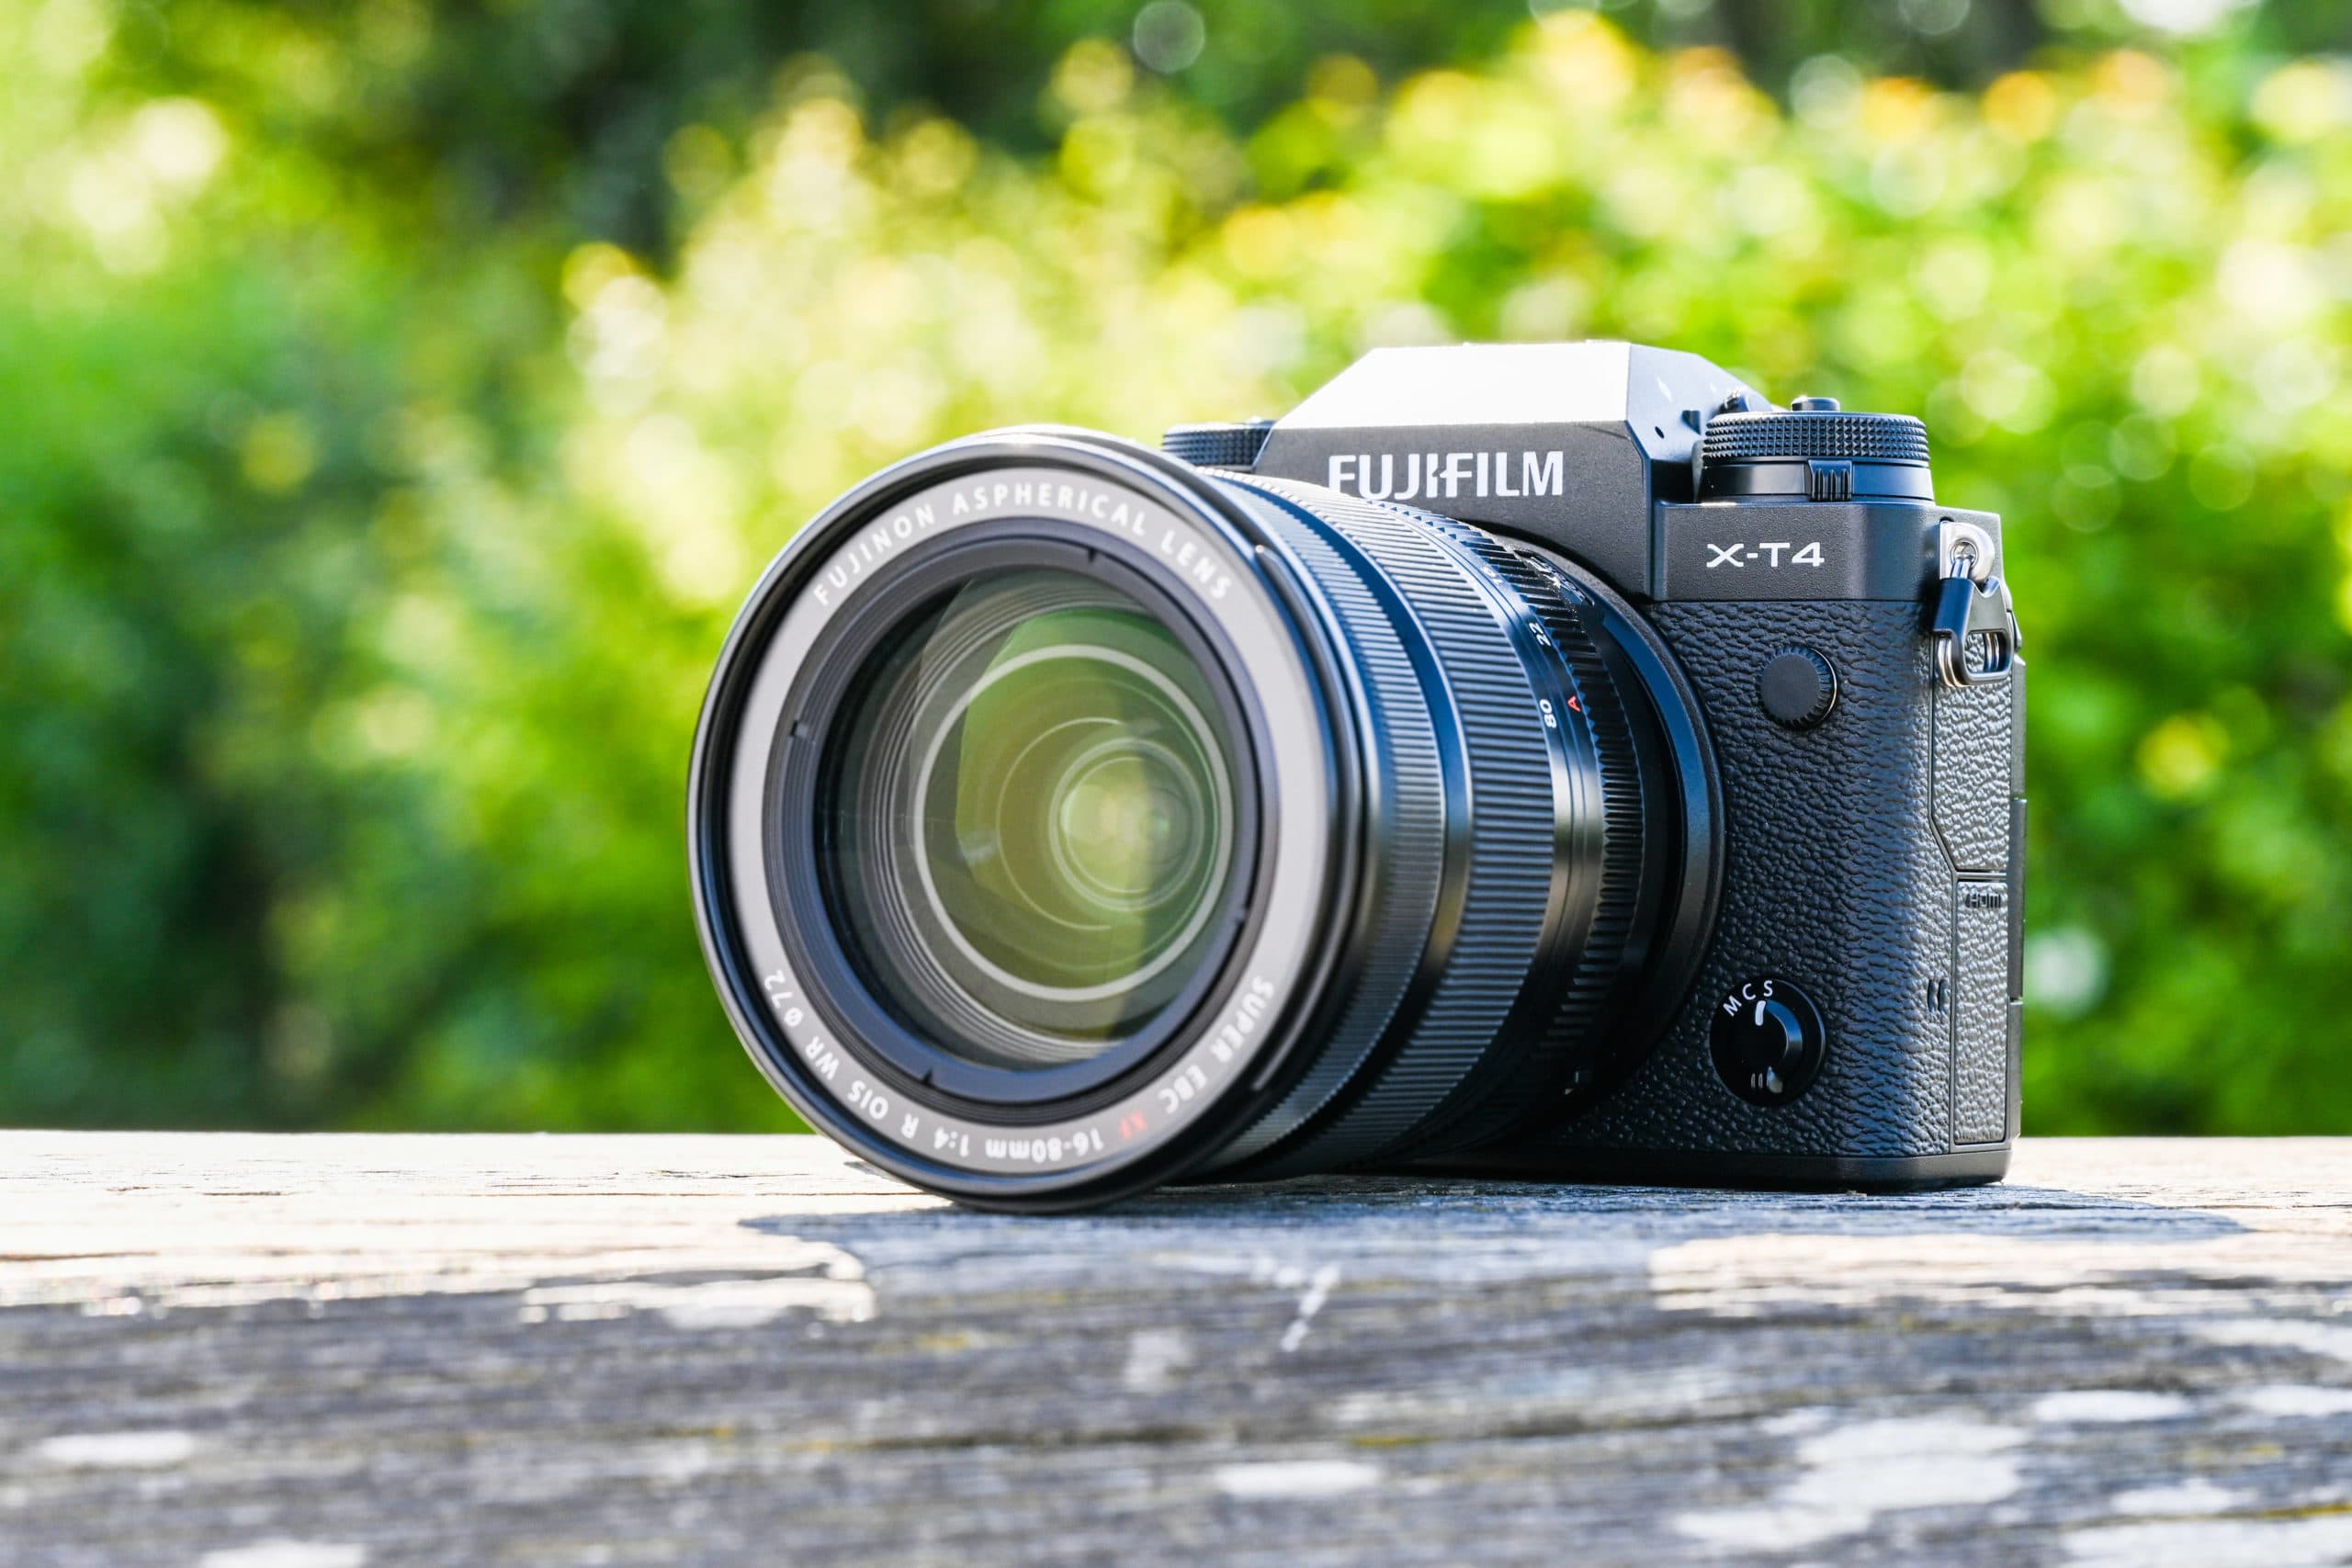 Video Review: Is the Fujifilm XT4 Your Next Camera?